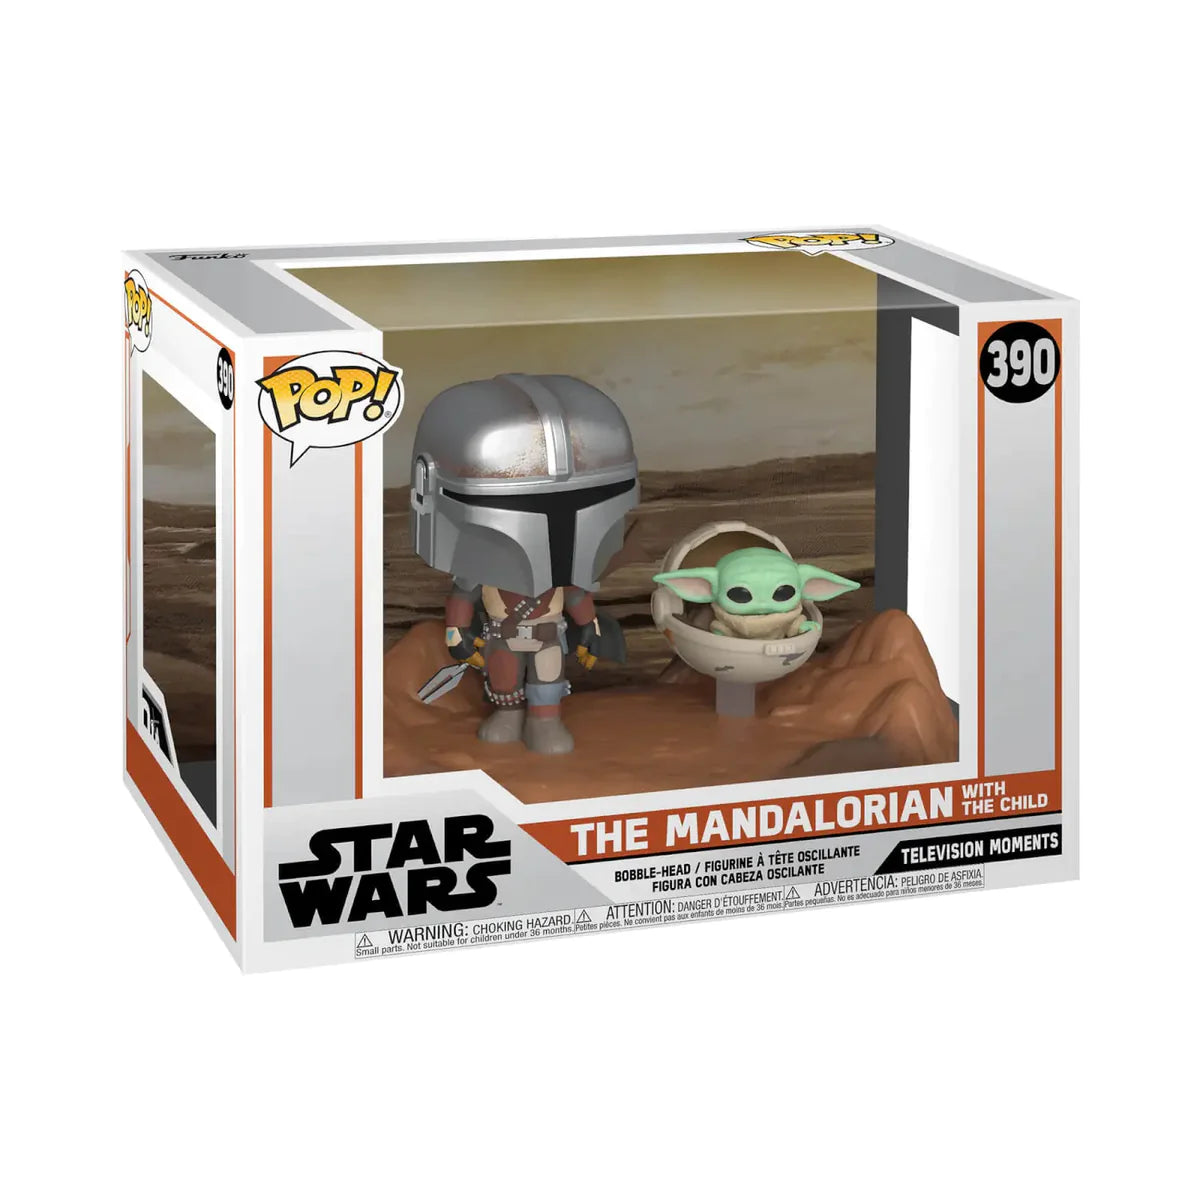 Funko Pop Star Wars Television Moments  The Mandalorian with The Chil –